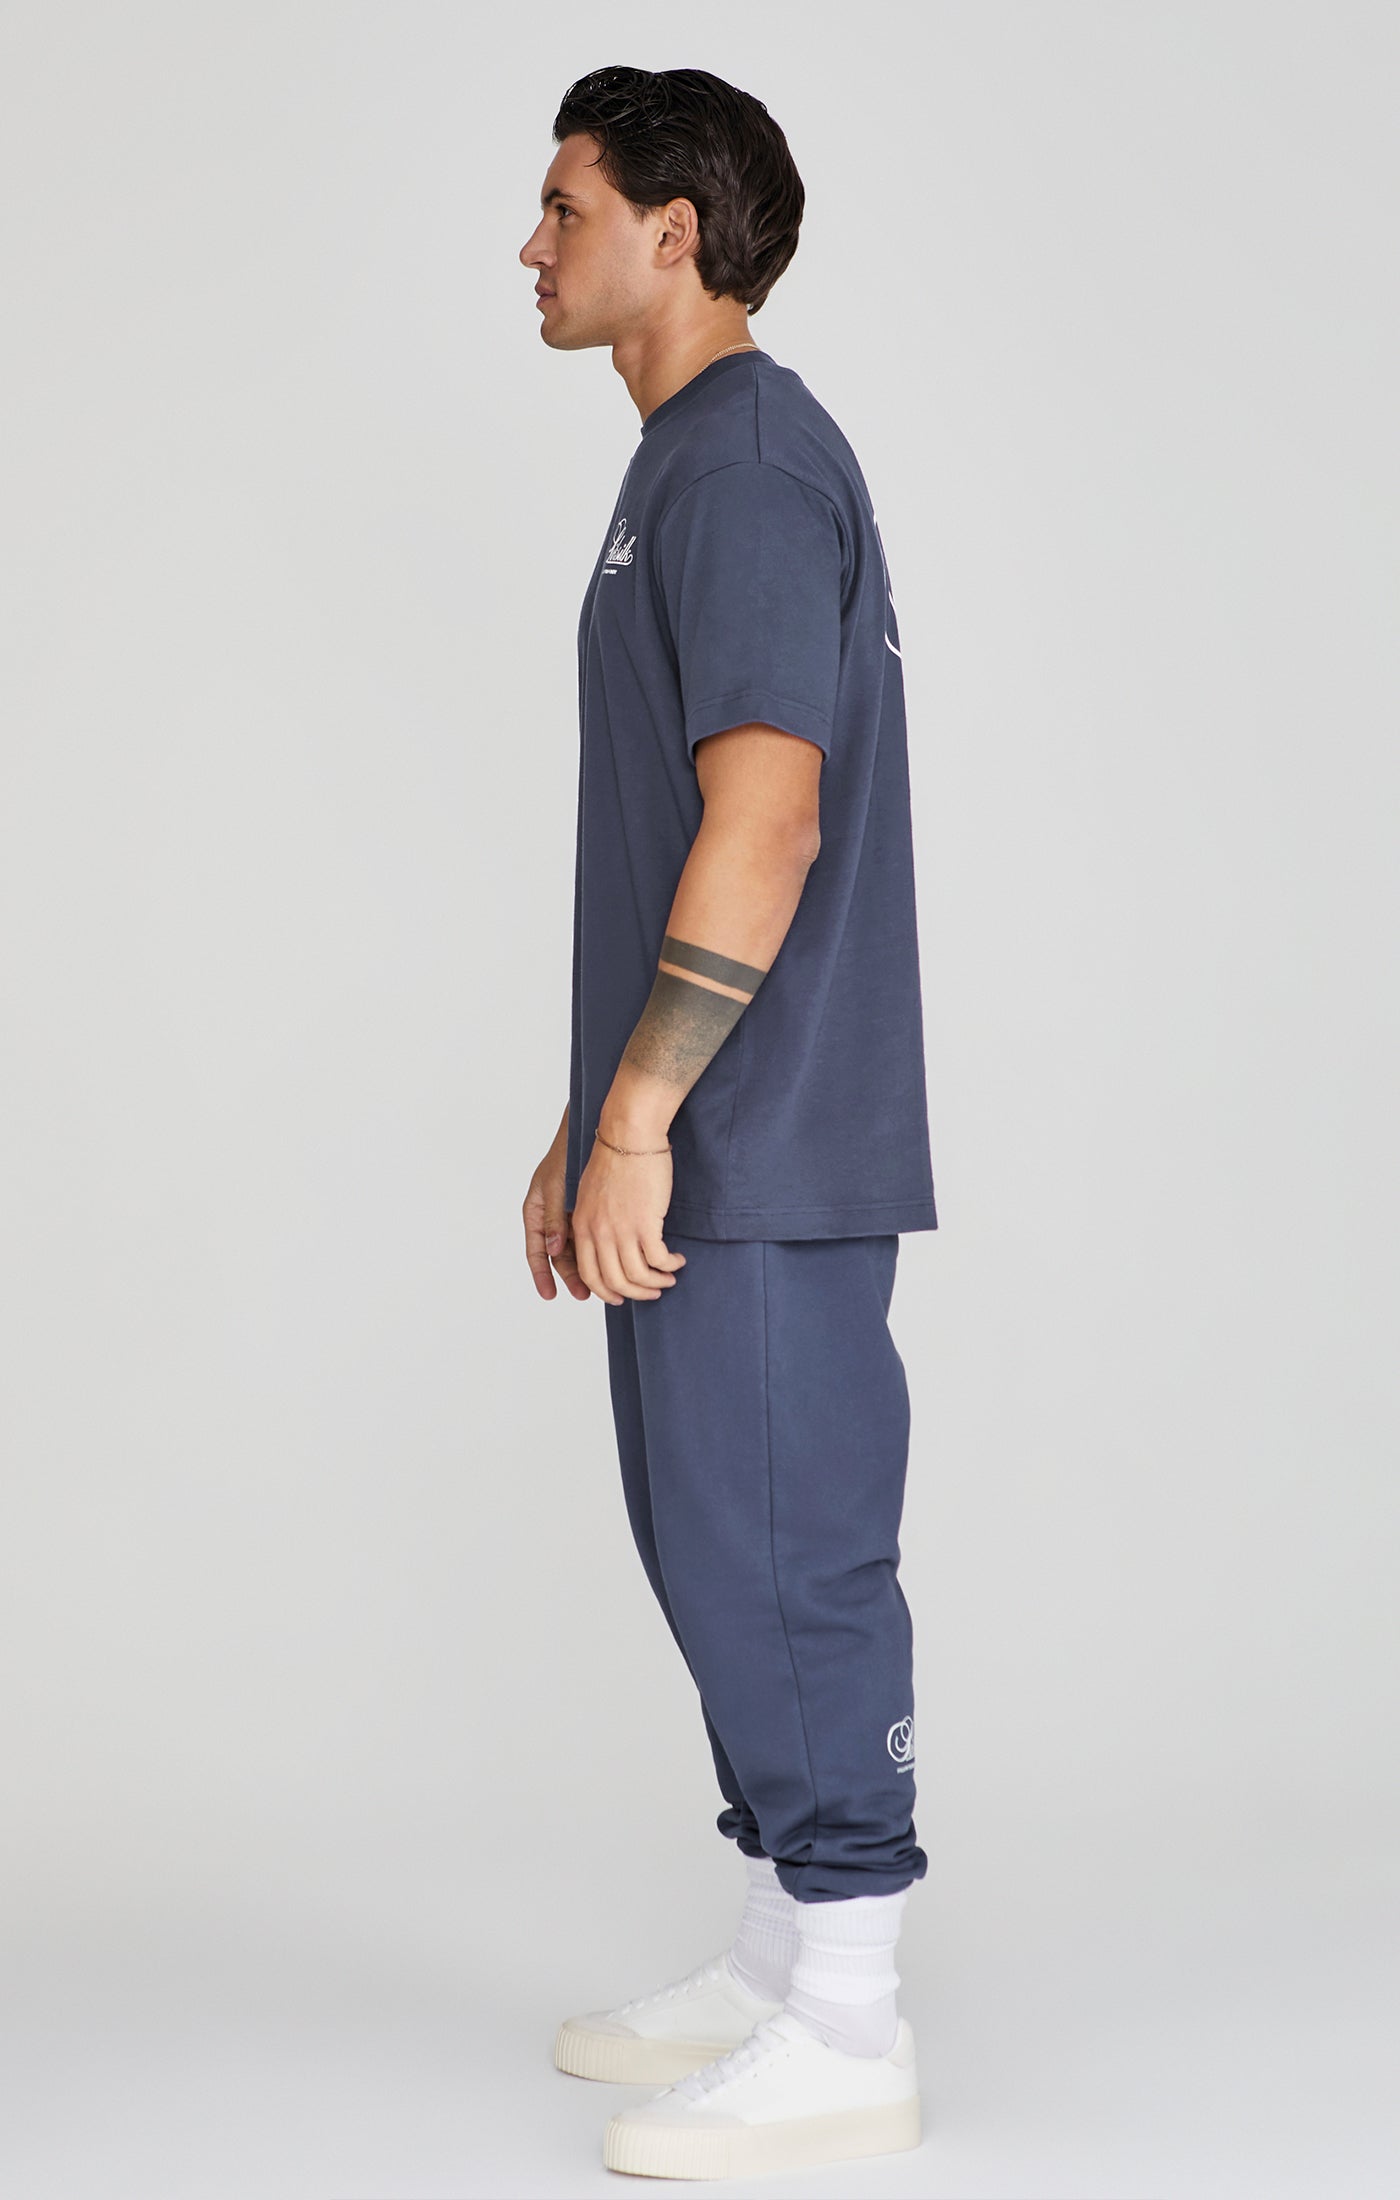 Graphic T-Shirt in Navy T-Shirts SikSilk   